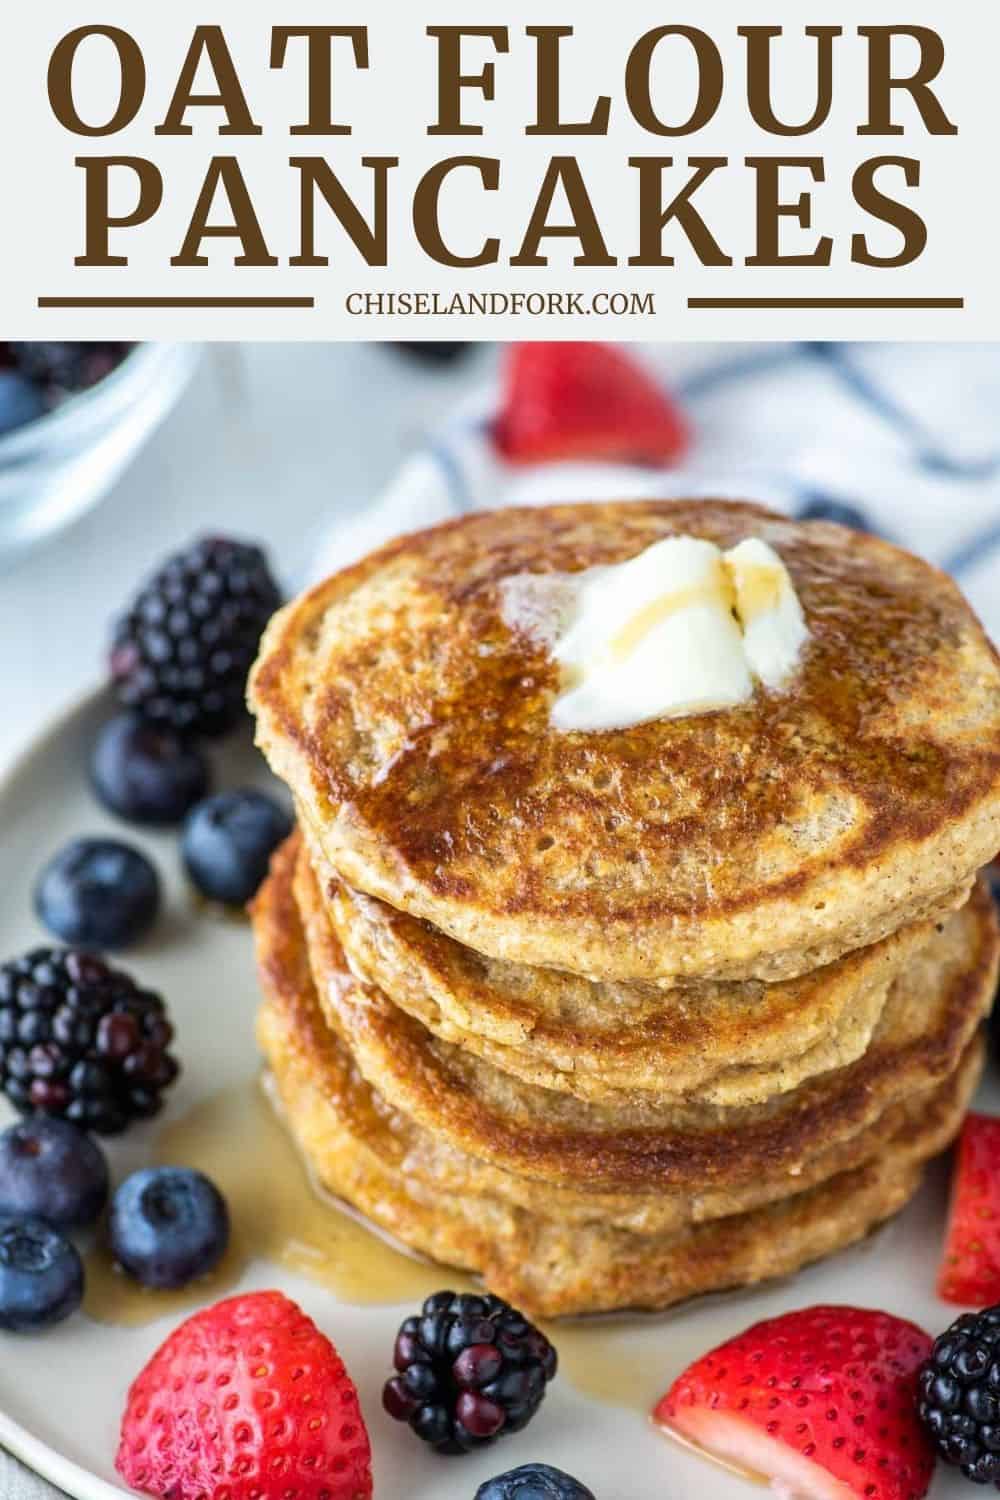 Oat Flour Pancakes Recipe - Gluten-Free and Low in Sugar - Chisel & Fork